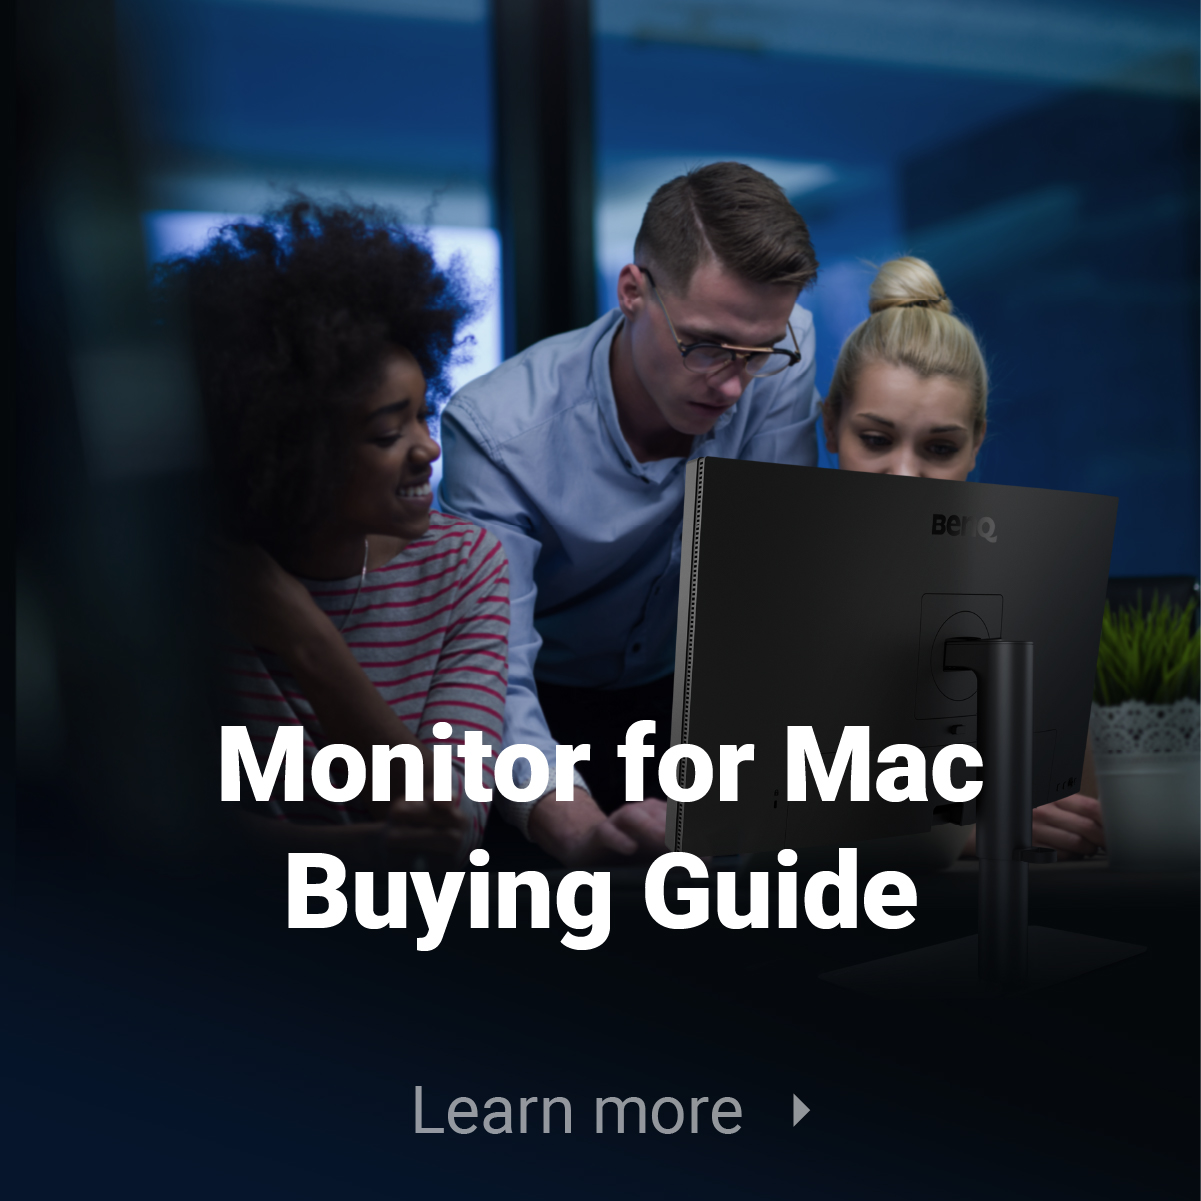 M3 iMac Buying Guide - Which One Is for You? - Mark Ellis Reviews